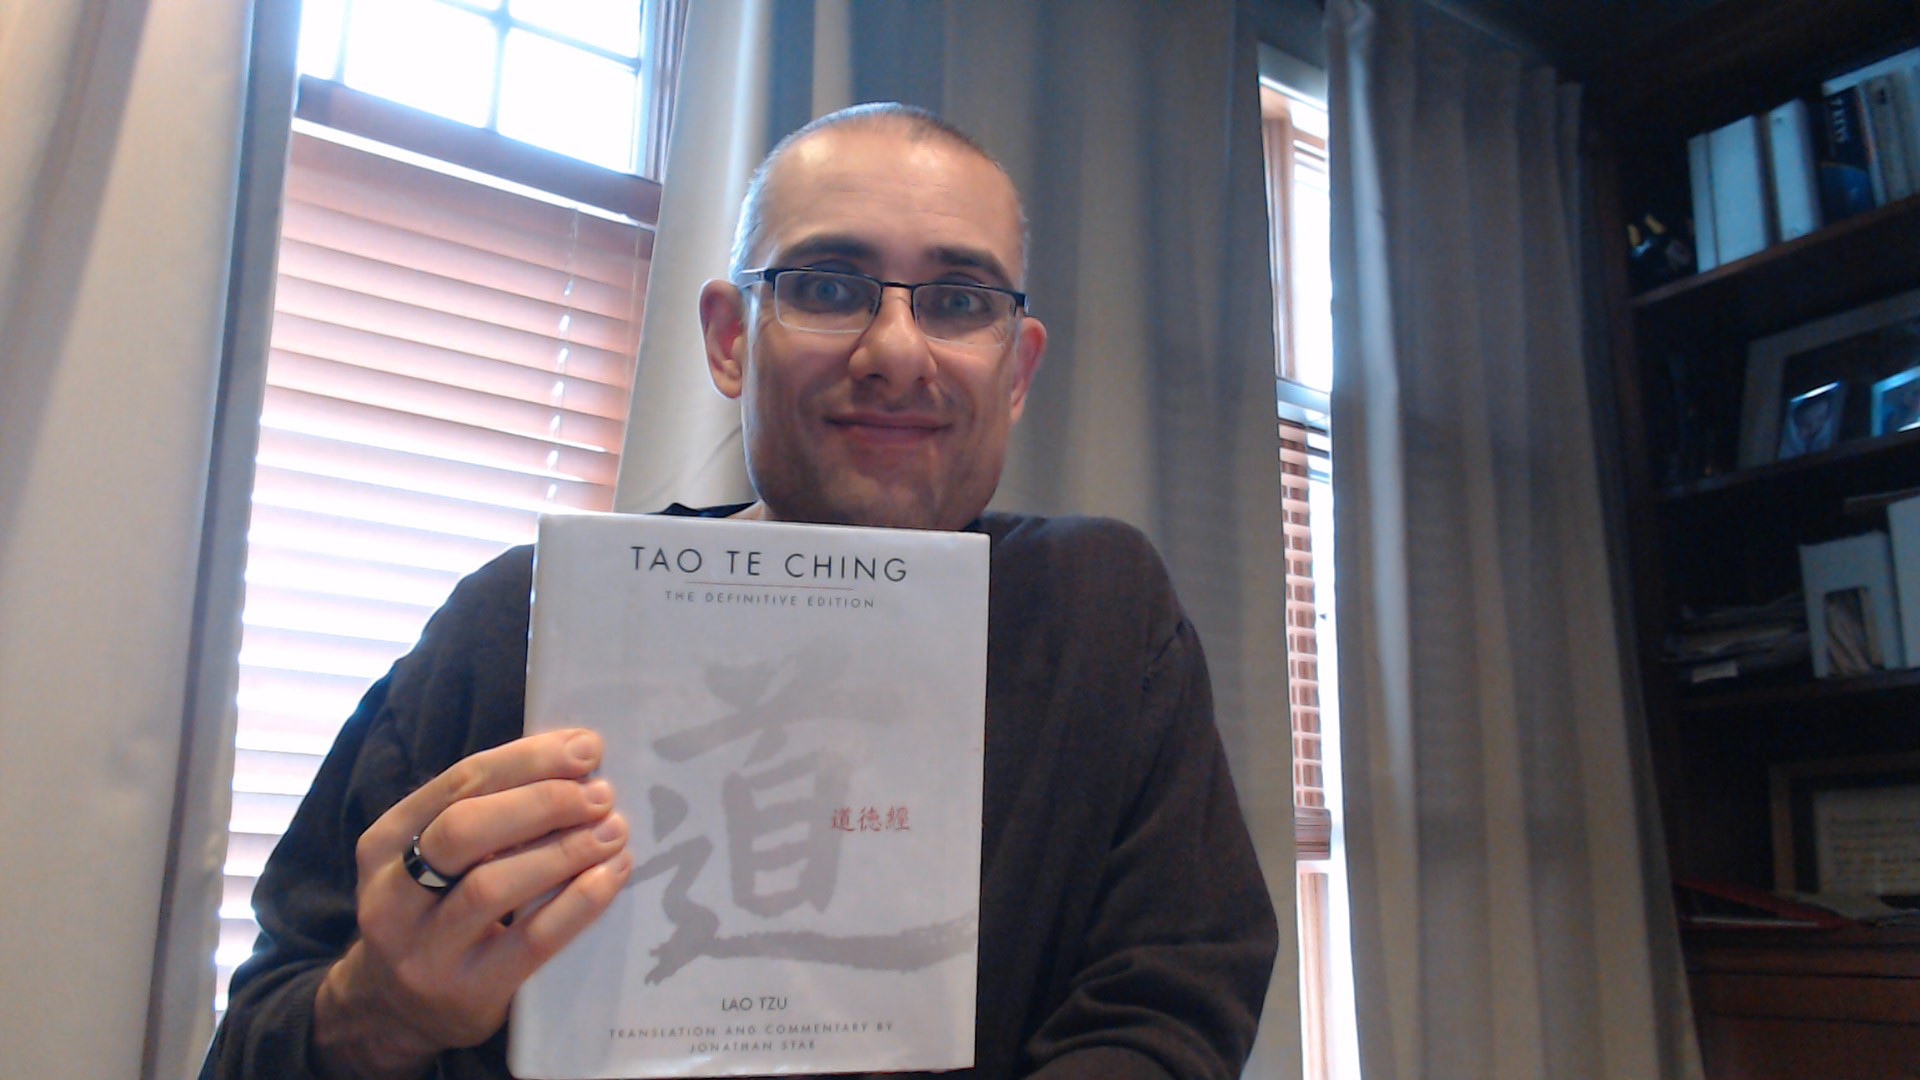 You are currently viewing Tao Te Ching by Lao Tzu- My Takeaways